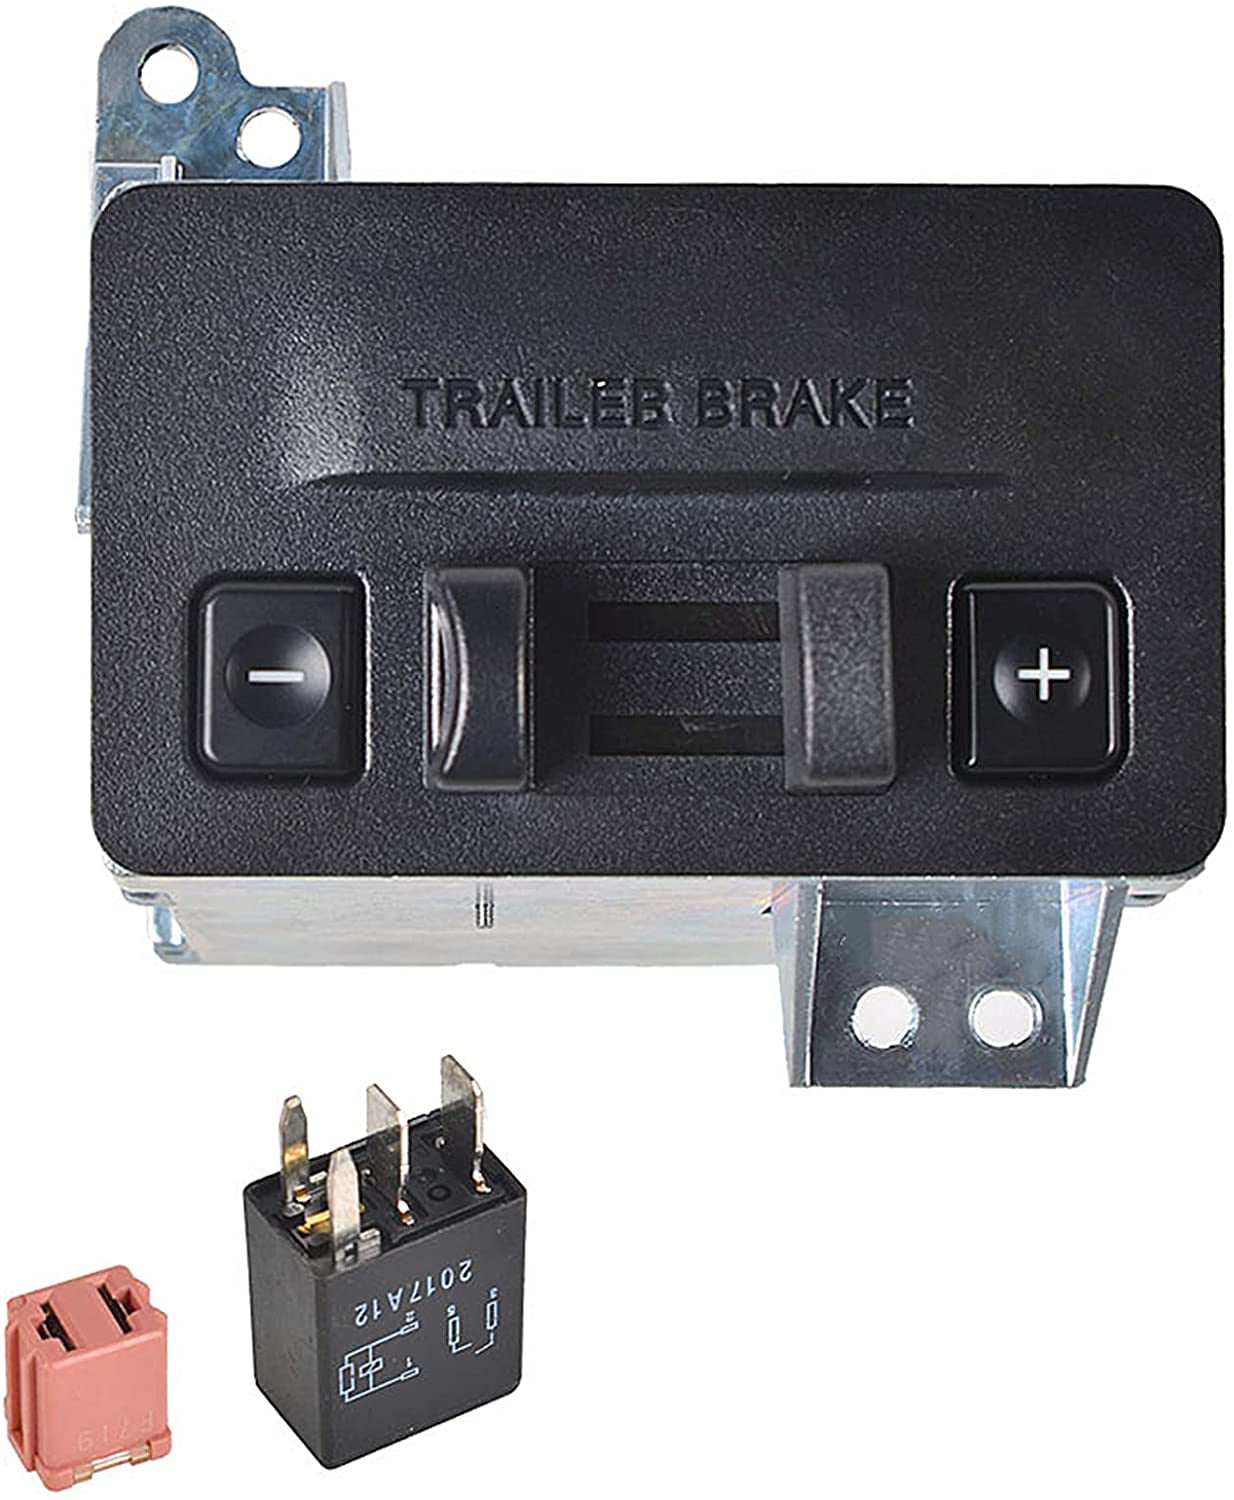 WFLNHB Brake Controller Module Kit W/Relays Replacement for 2011-2014 Ford F-150 AL3Z-19H332-AA 